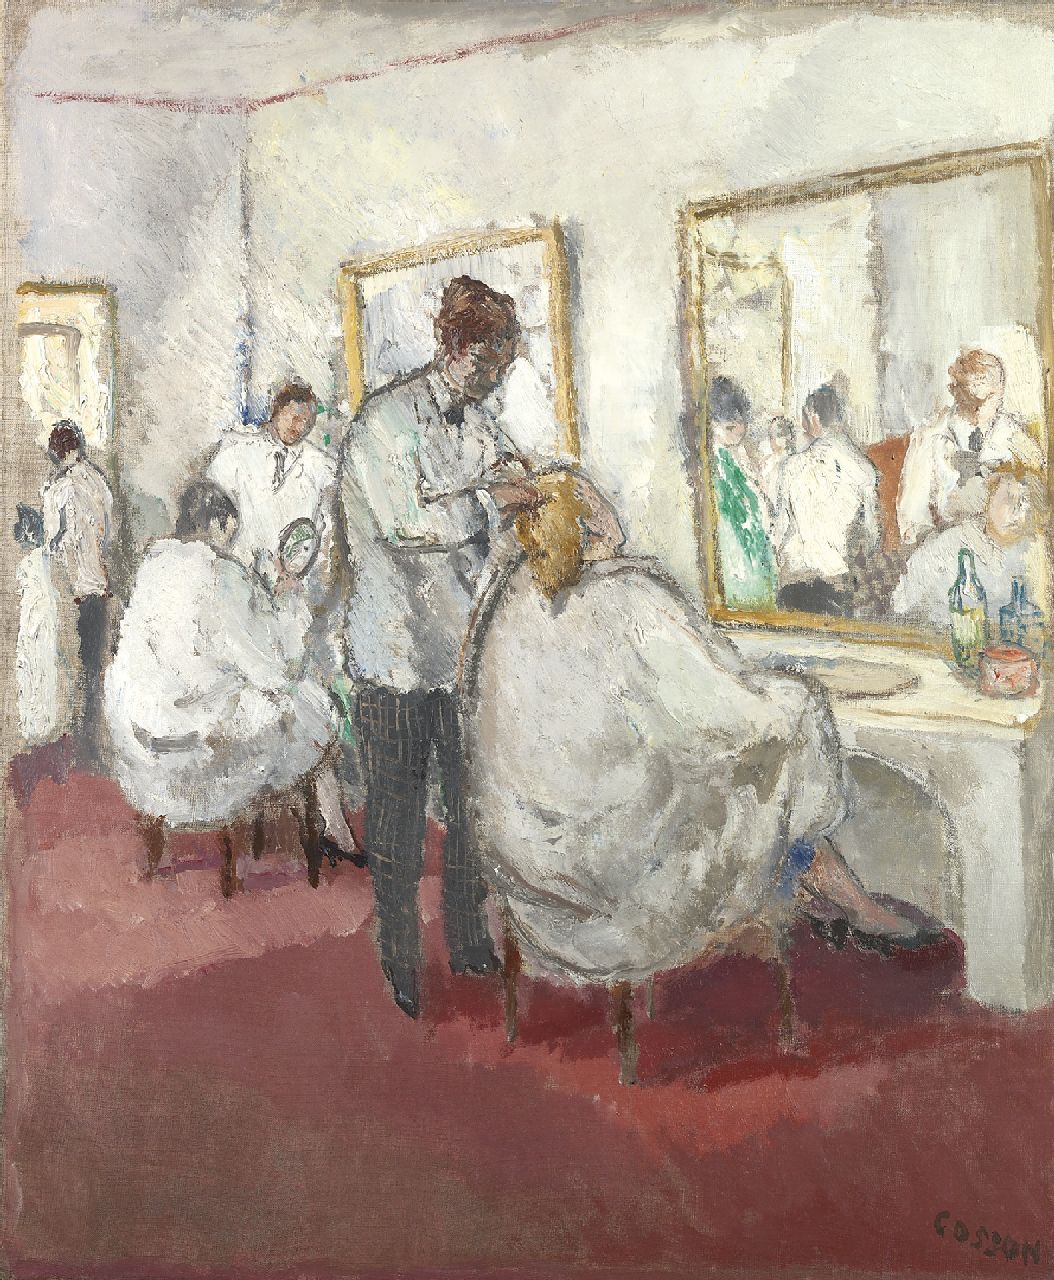 Cosson J.L.M.  | Jean Louis 'Marcel' Cosson | Paintings offered for sale | Salon de coiffure, oil on canvas 65.4 x 54.4 cm, signed l.r. and verso gedateerd 1930/31